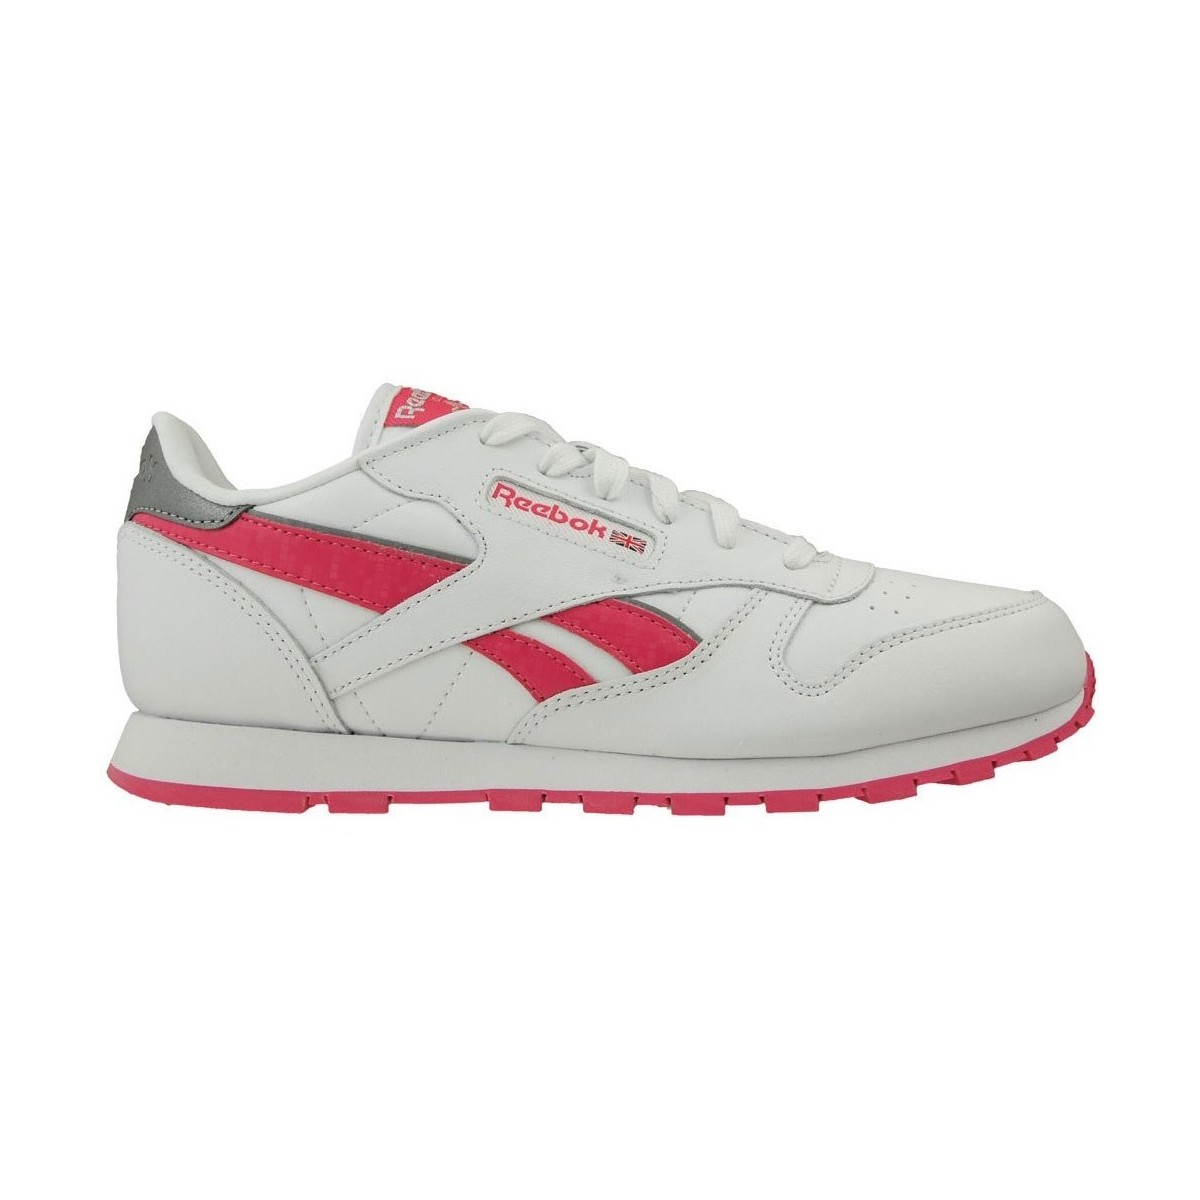 Shoes Children Low top trainers Reebok Sport CL Leather Reflect Pink, White